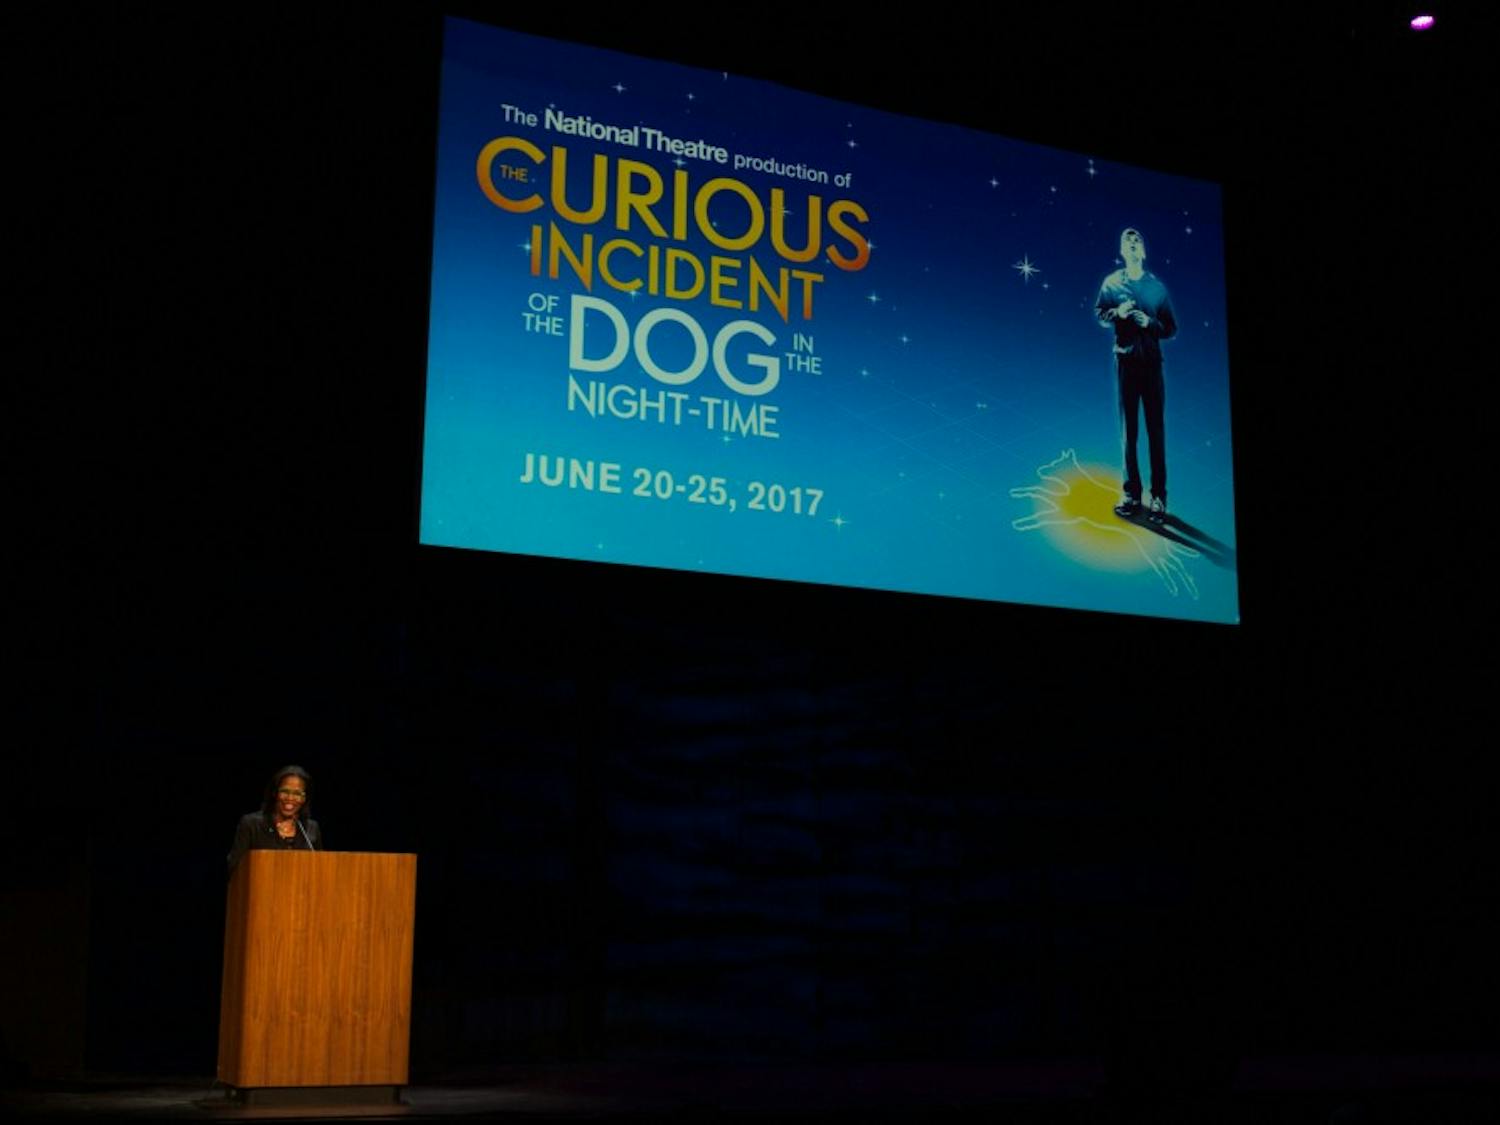 Colleen Jennings-Roggensack announces the only play on the 2016-2017 Gammage Season lineup on Monday, March 21, 2016. "The Curious Incident of the Dog in the Night-Time" will be coming to Gammage from June 20-25 in 2017.